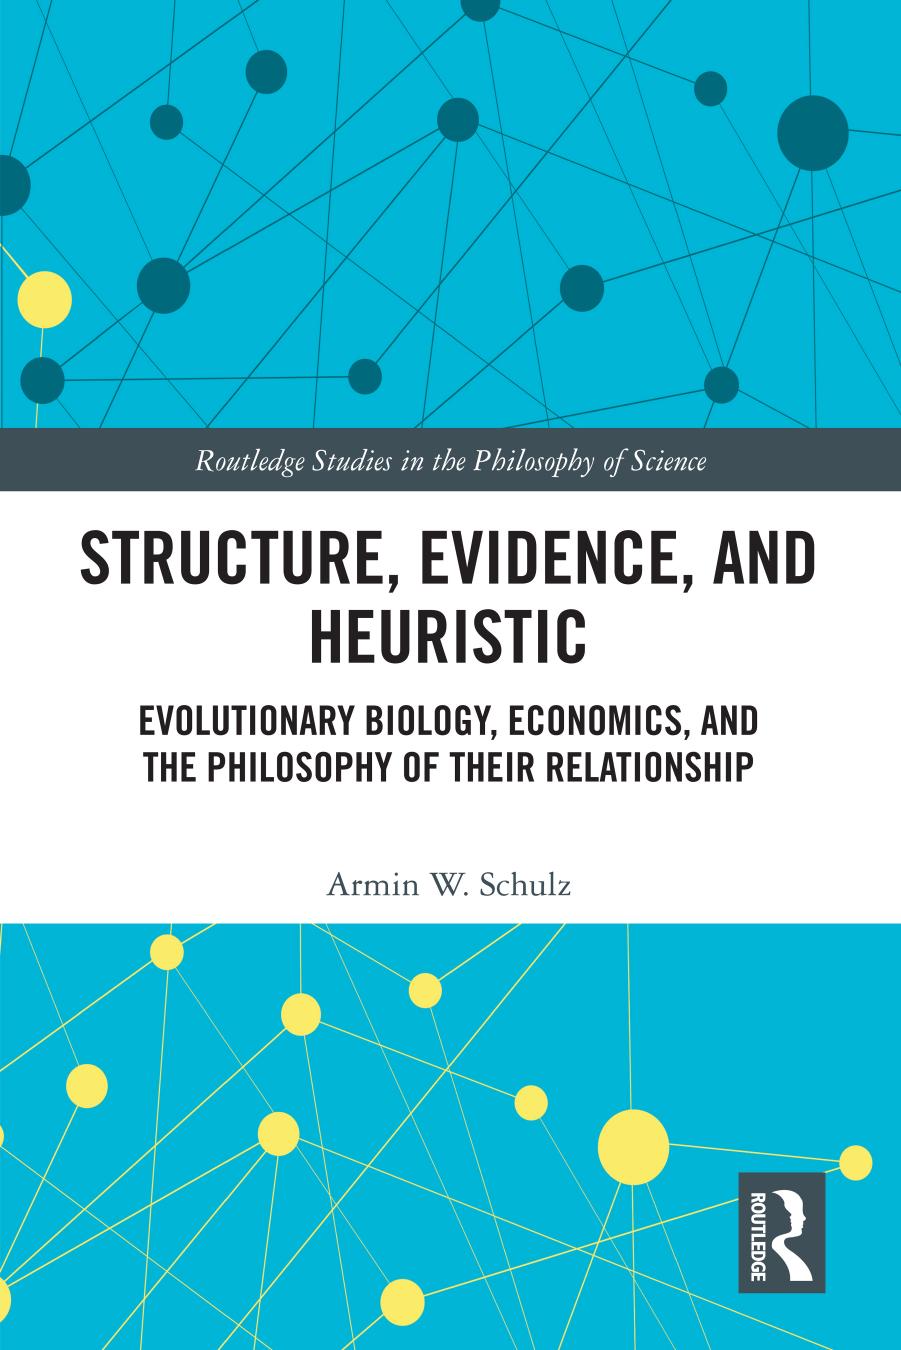 Structure, Evidence, and Heuristic; Evolutionary Biology, Econcs, and the Philosophy of Their Relationship  by Armin W. Schulz